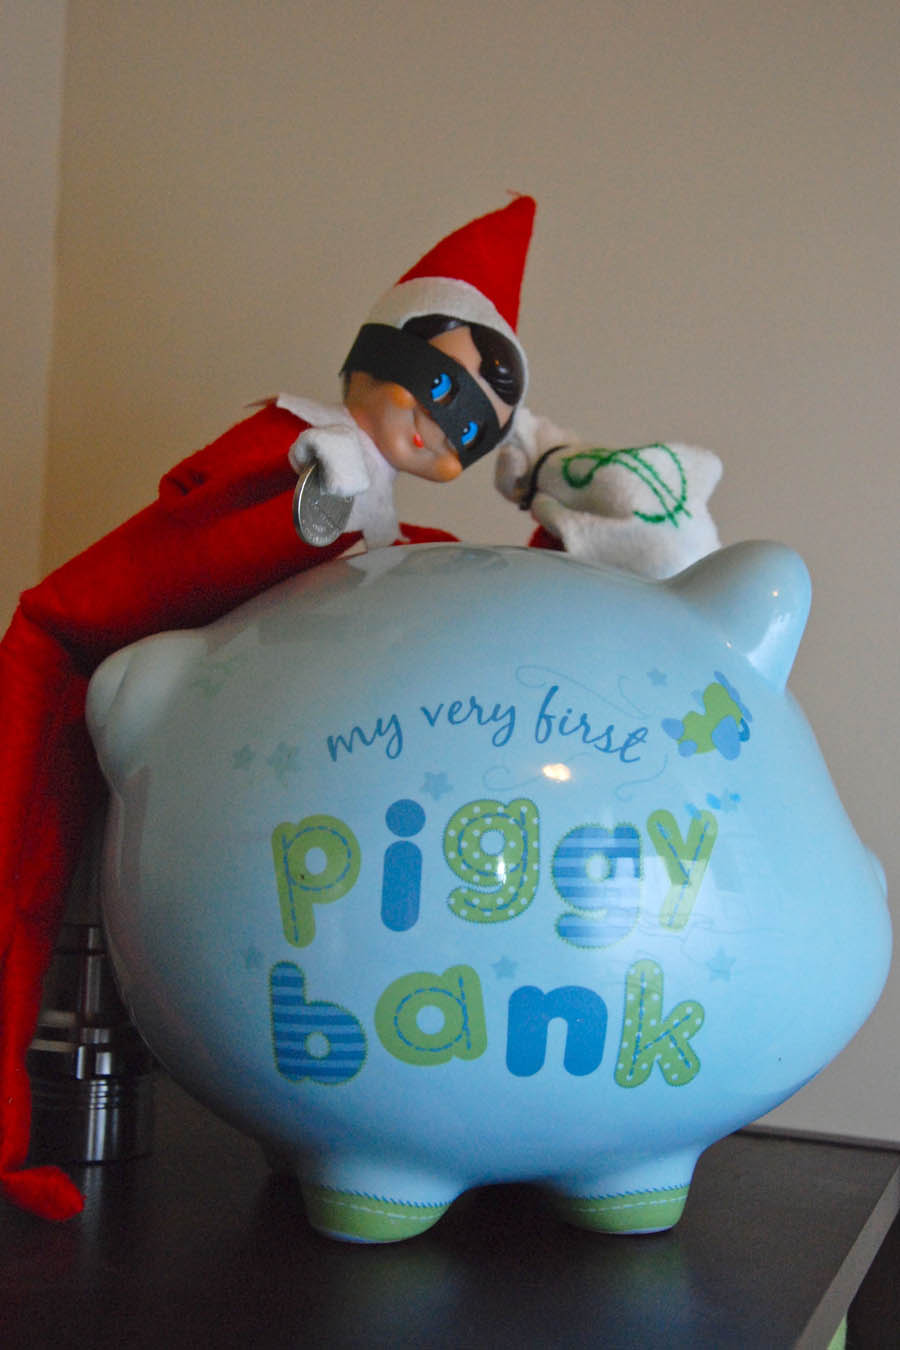 30 fun and unique Elf on the Shelf Ideas - Elf On the Shelf Bandit breaking into piggy bank